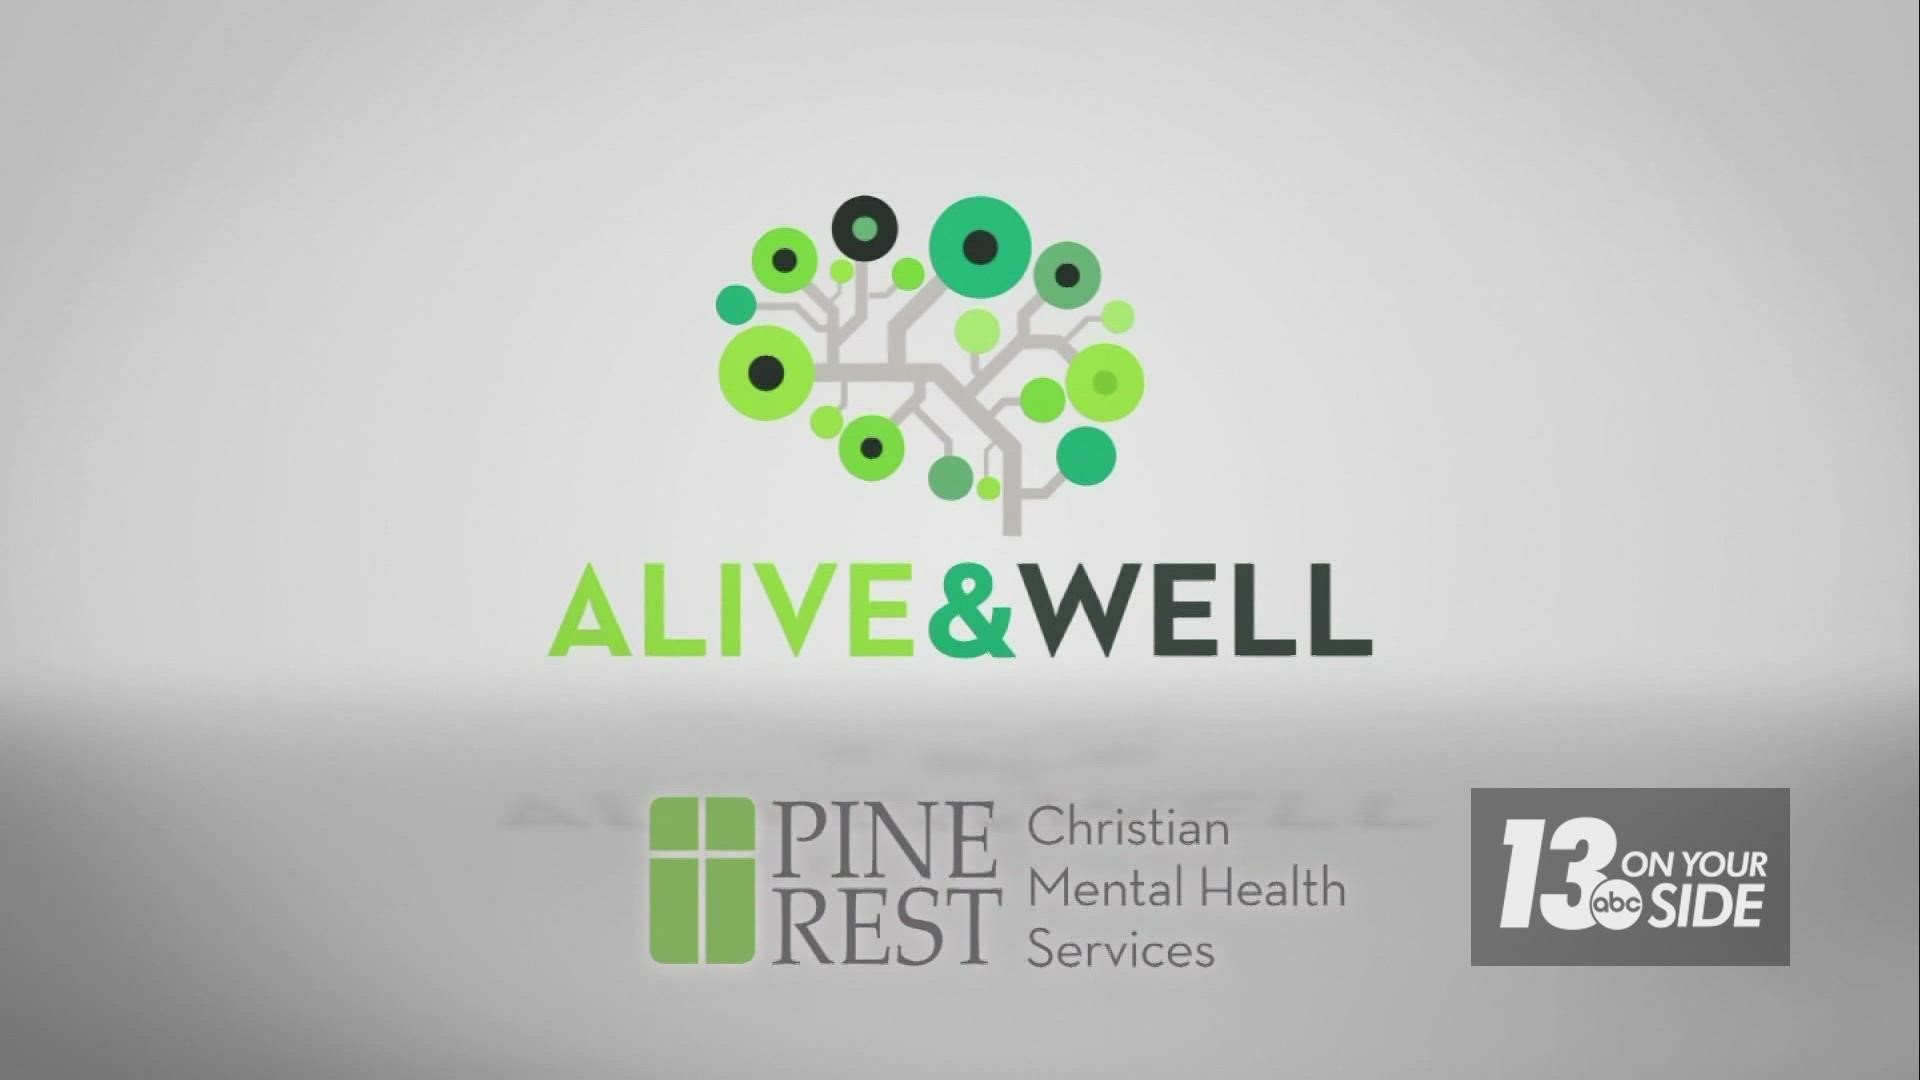 Pine Rest's Holiday Mental Health series features expert advice from their clinicians and staff to help get you through the season!